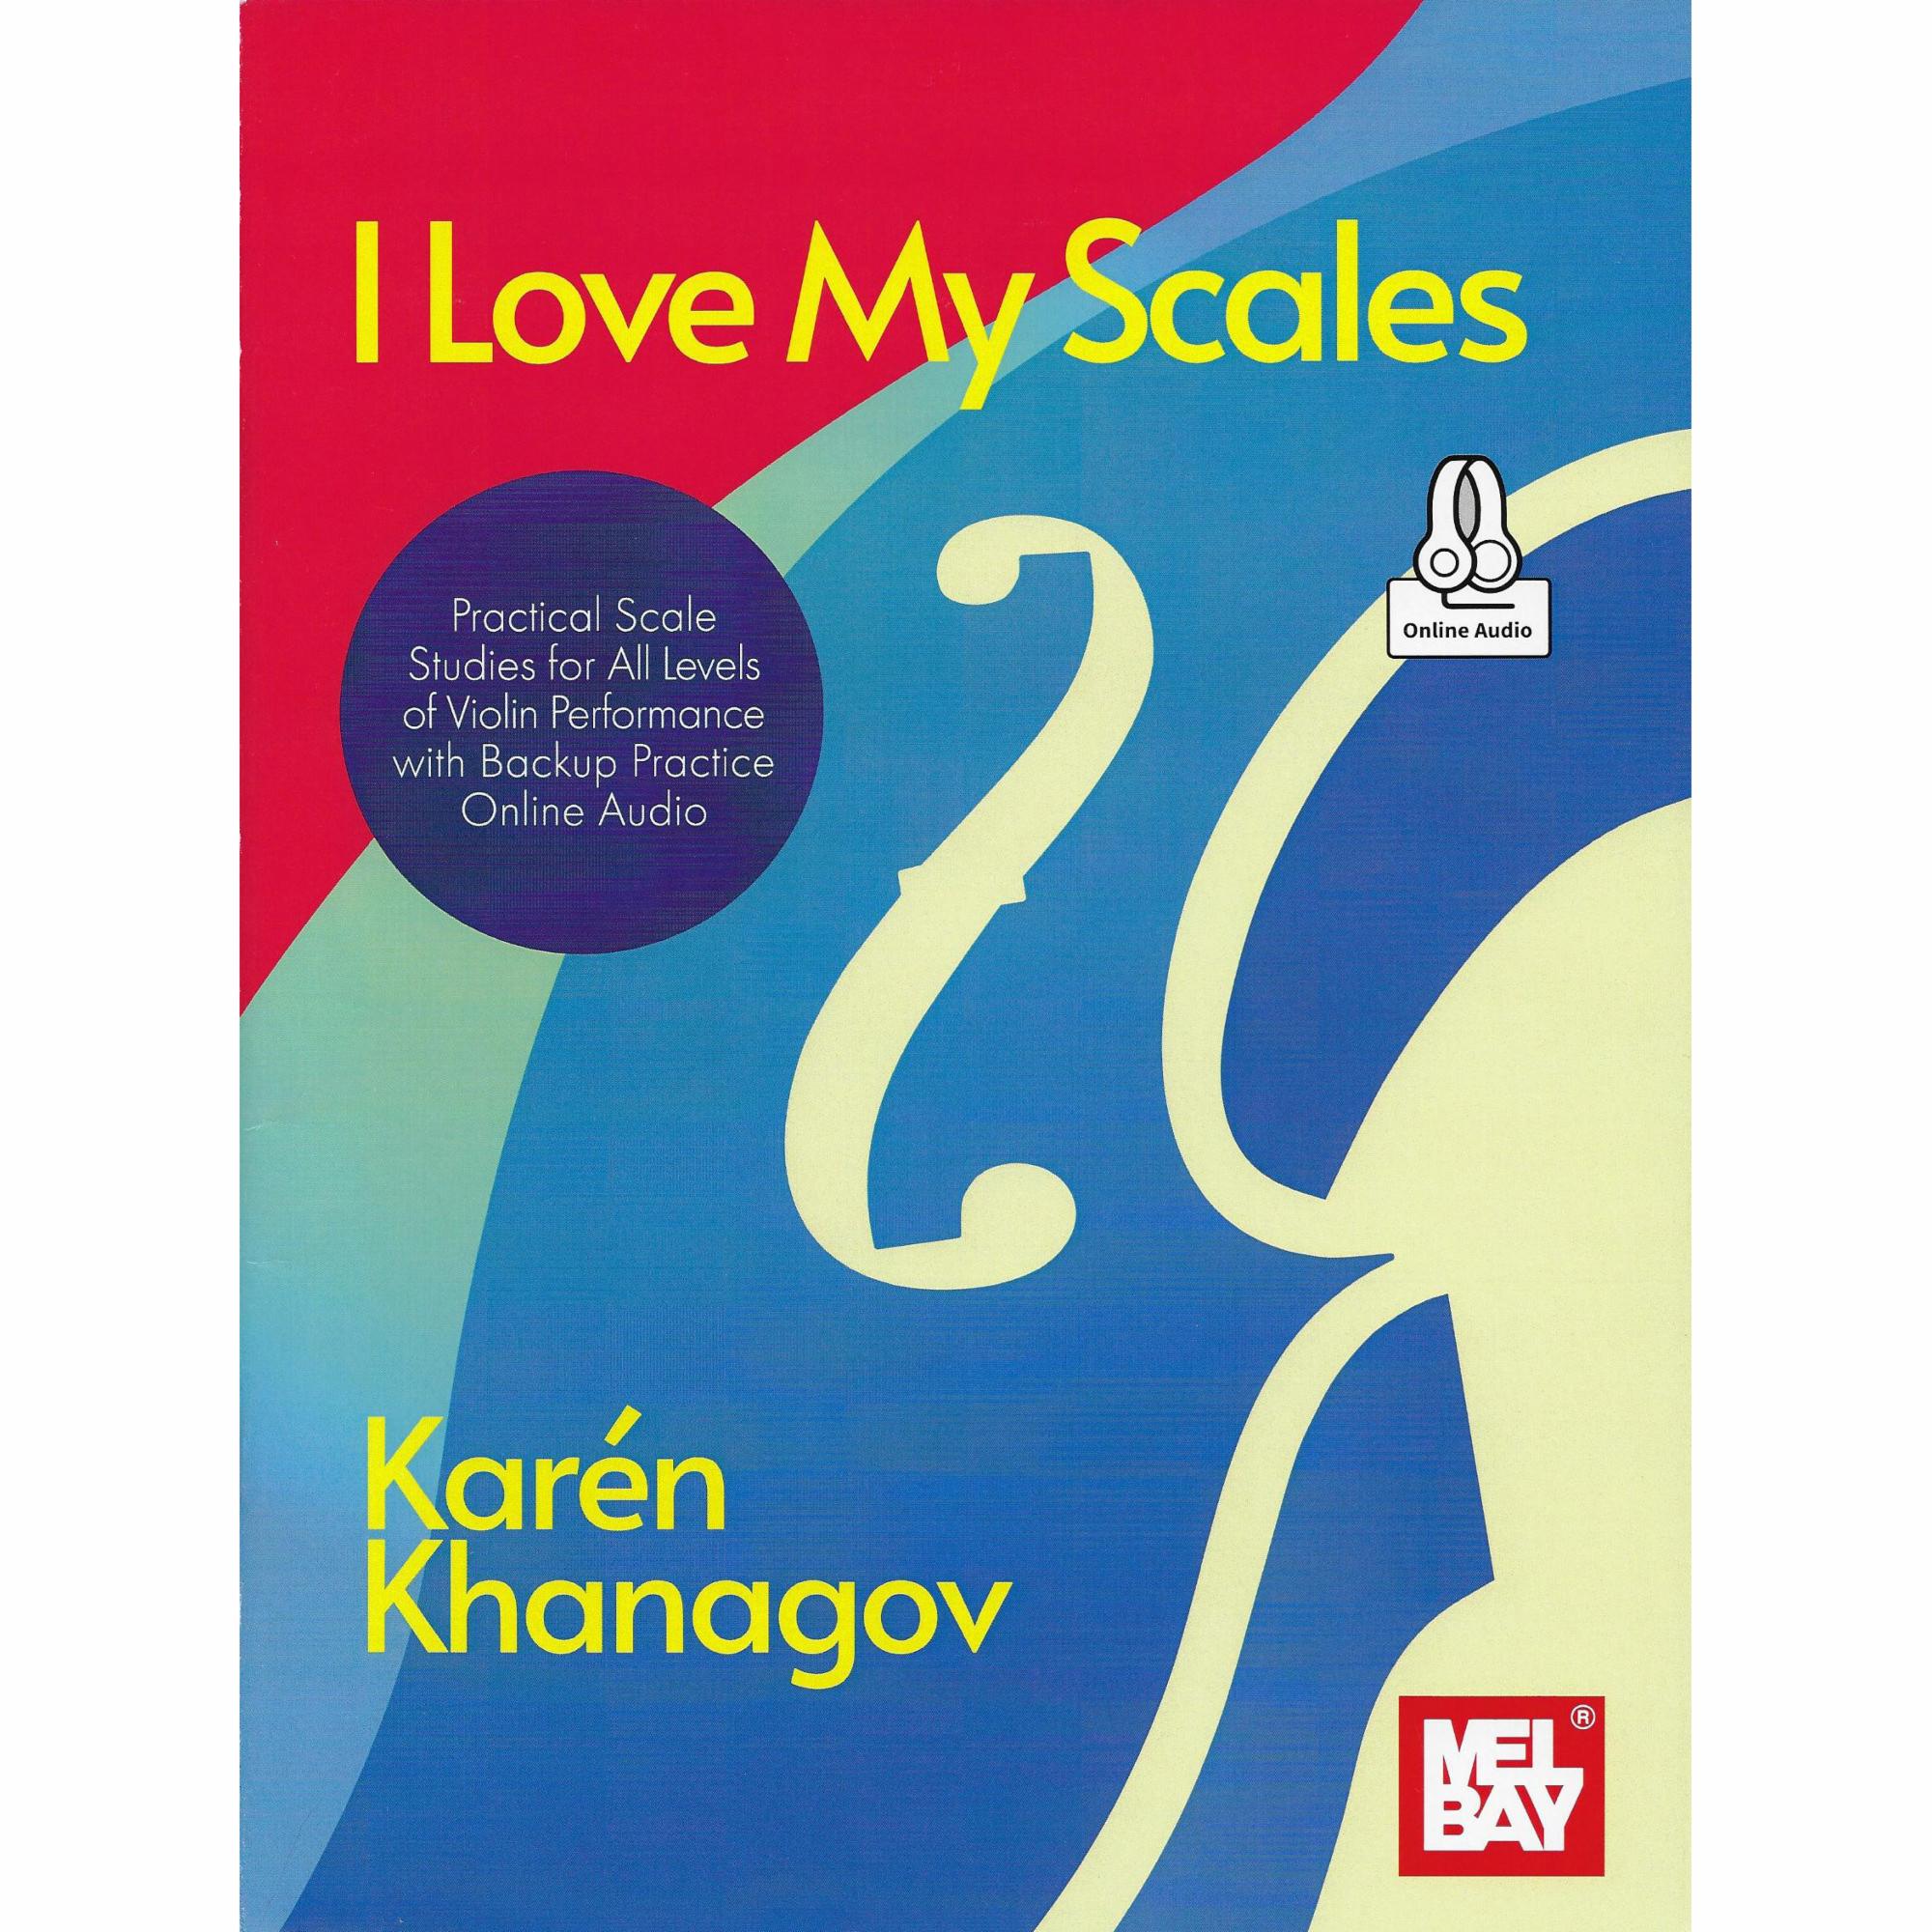 I Love My Scales: Practical Scales Studies for All Levels of Violin Performance